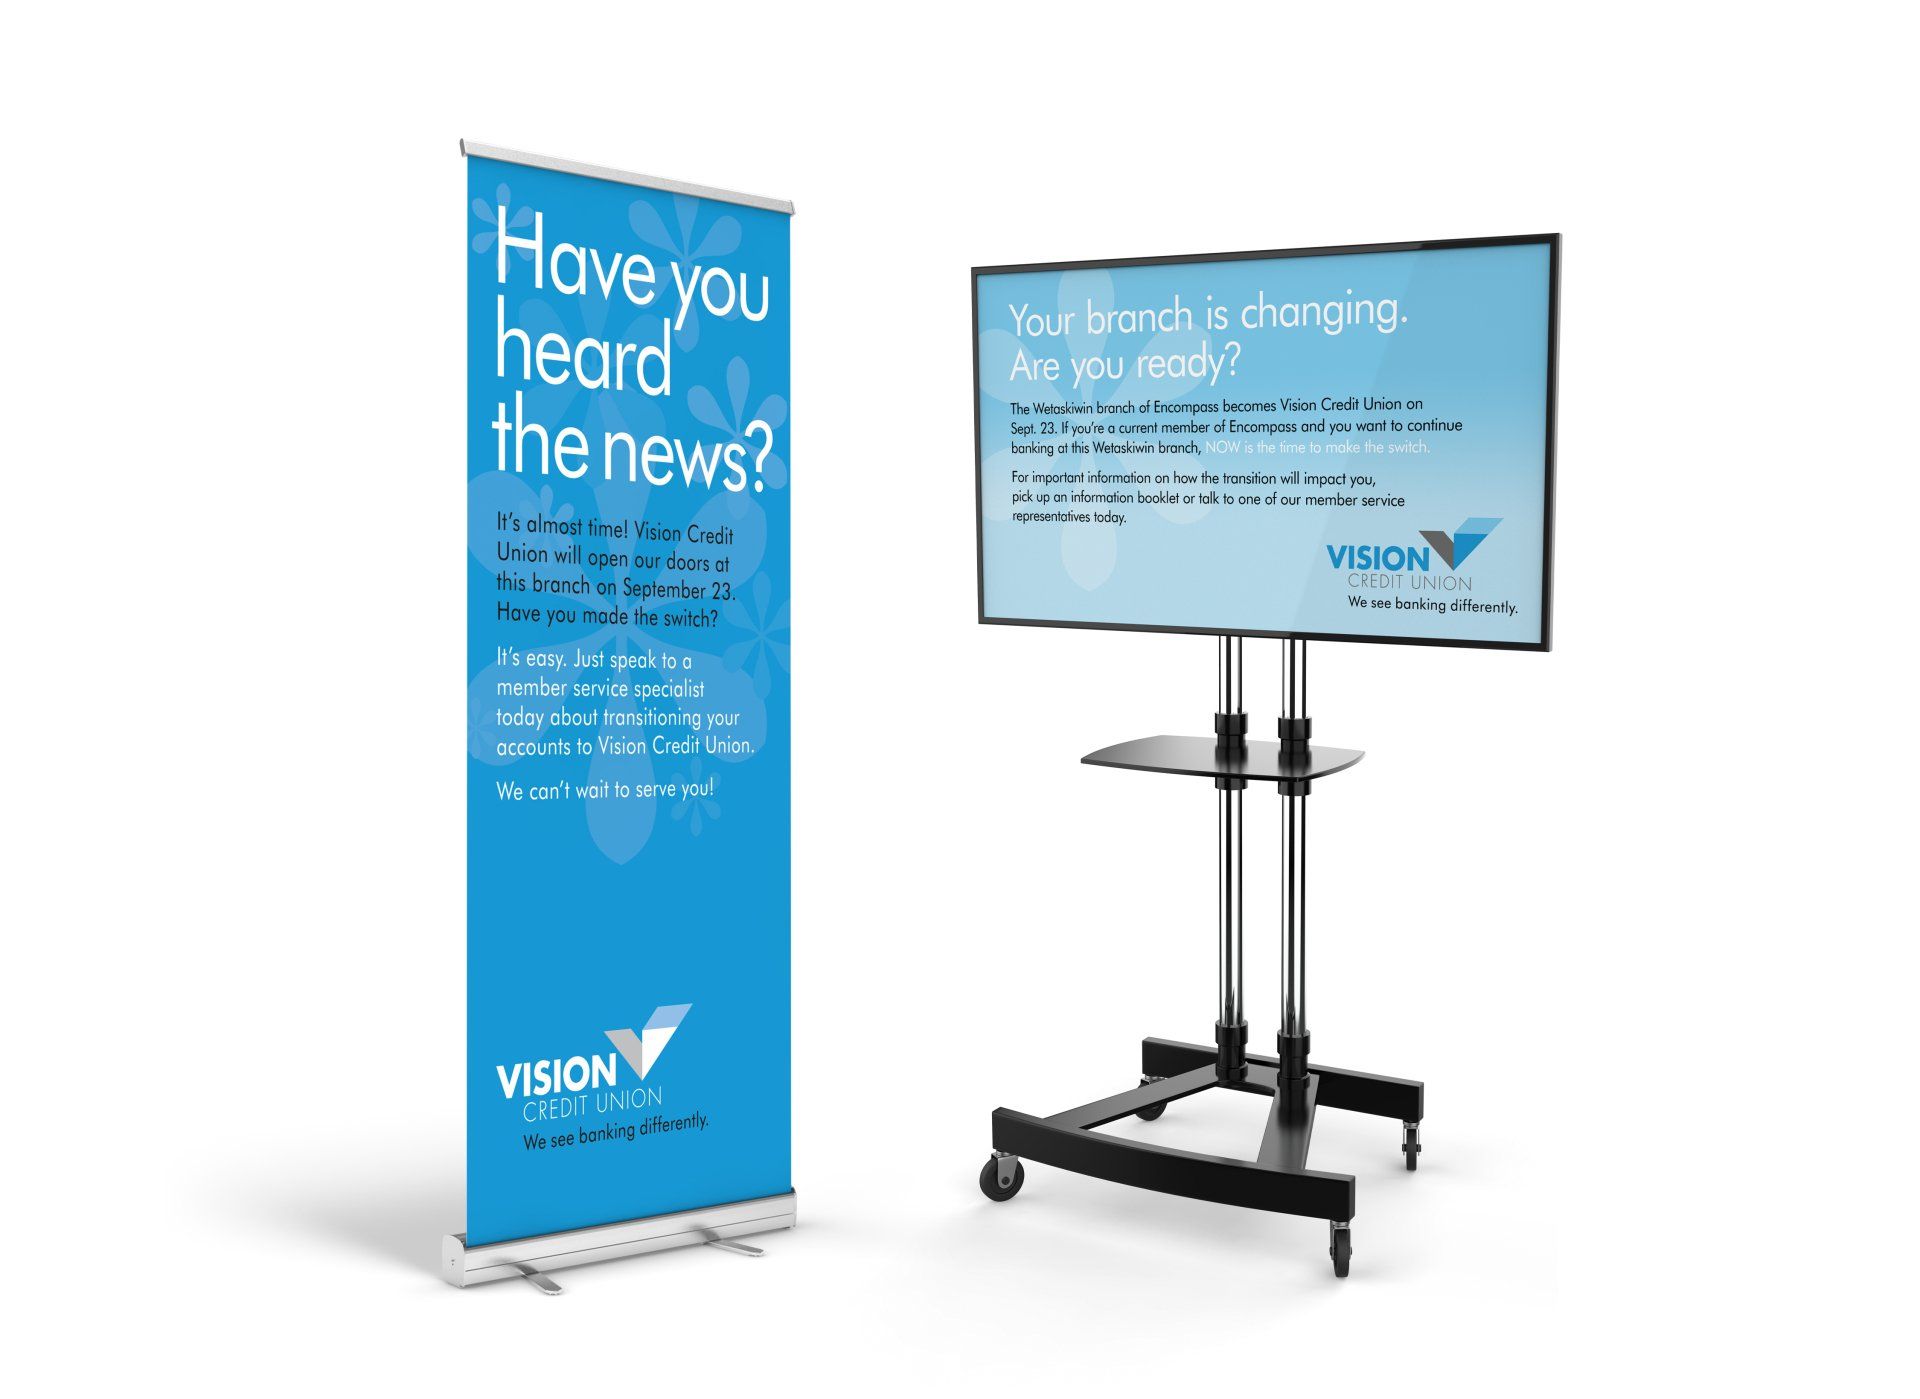 IN-BRANCH ADVERTISING AND SIGNAGE FOR VISION CREDIT UNION BY IVY DESIGN INC